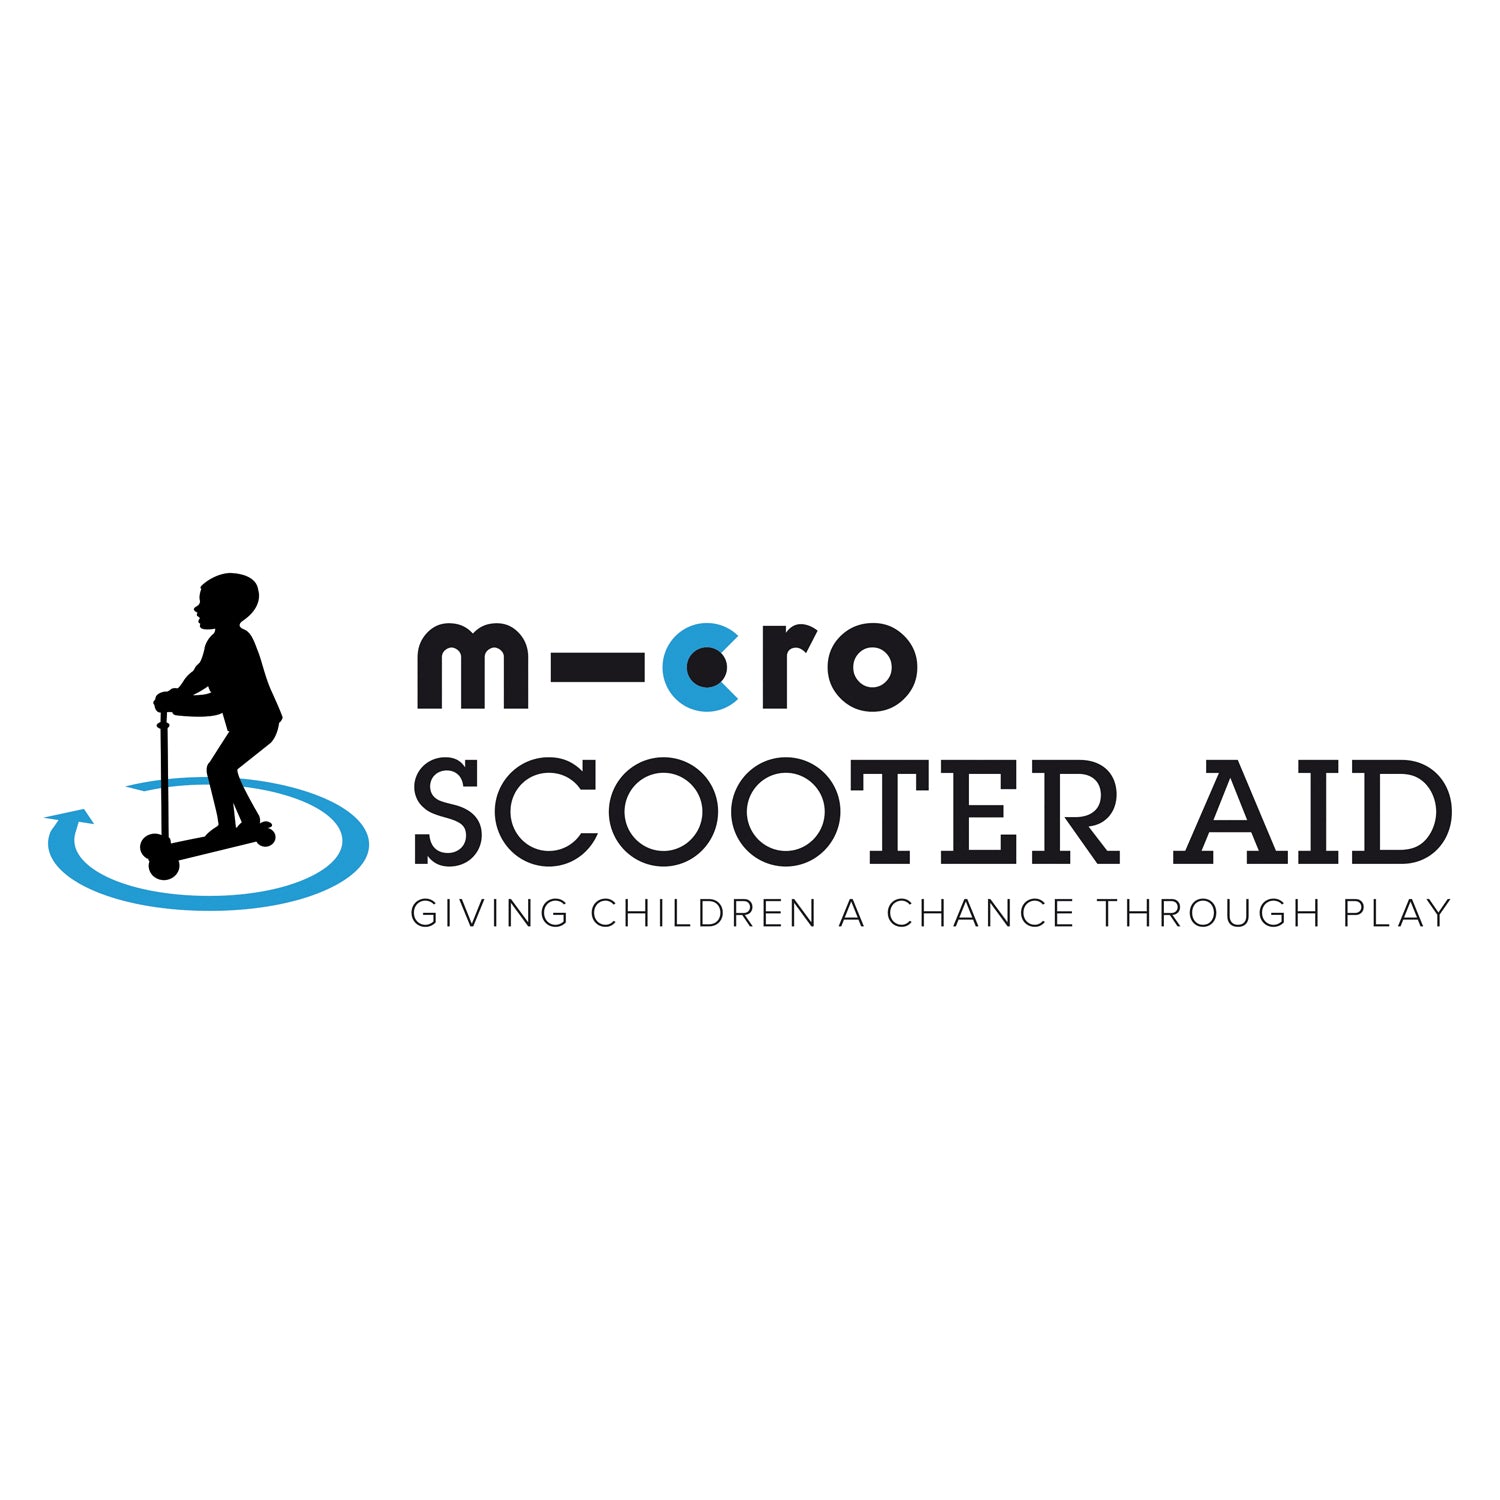 A Scooter Aid Good Cause